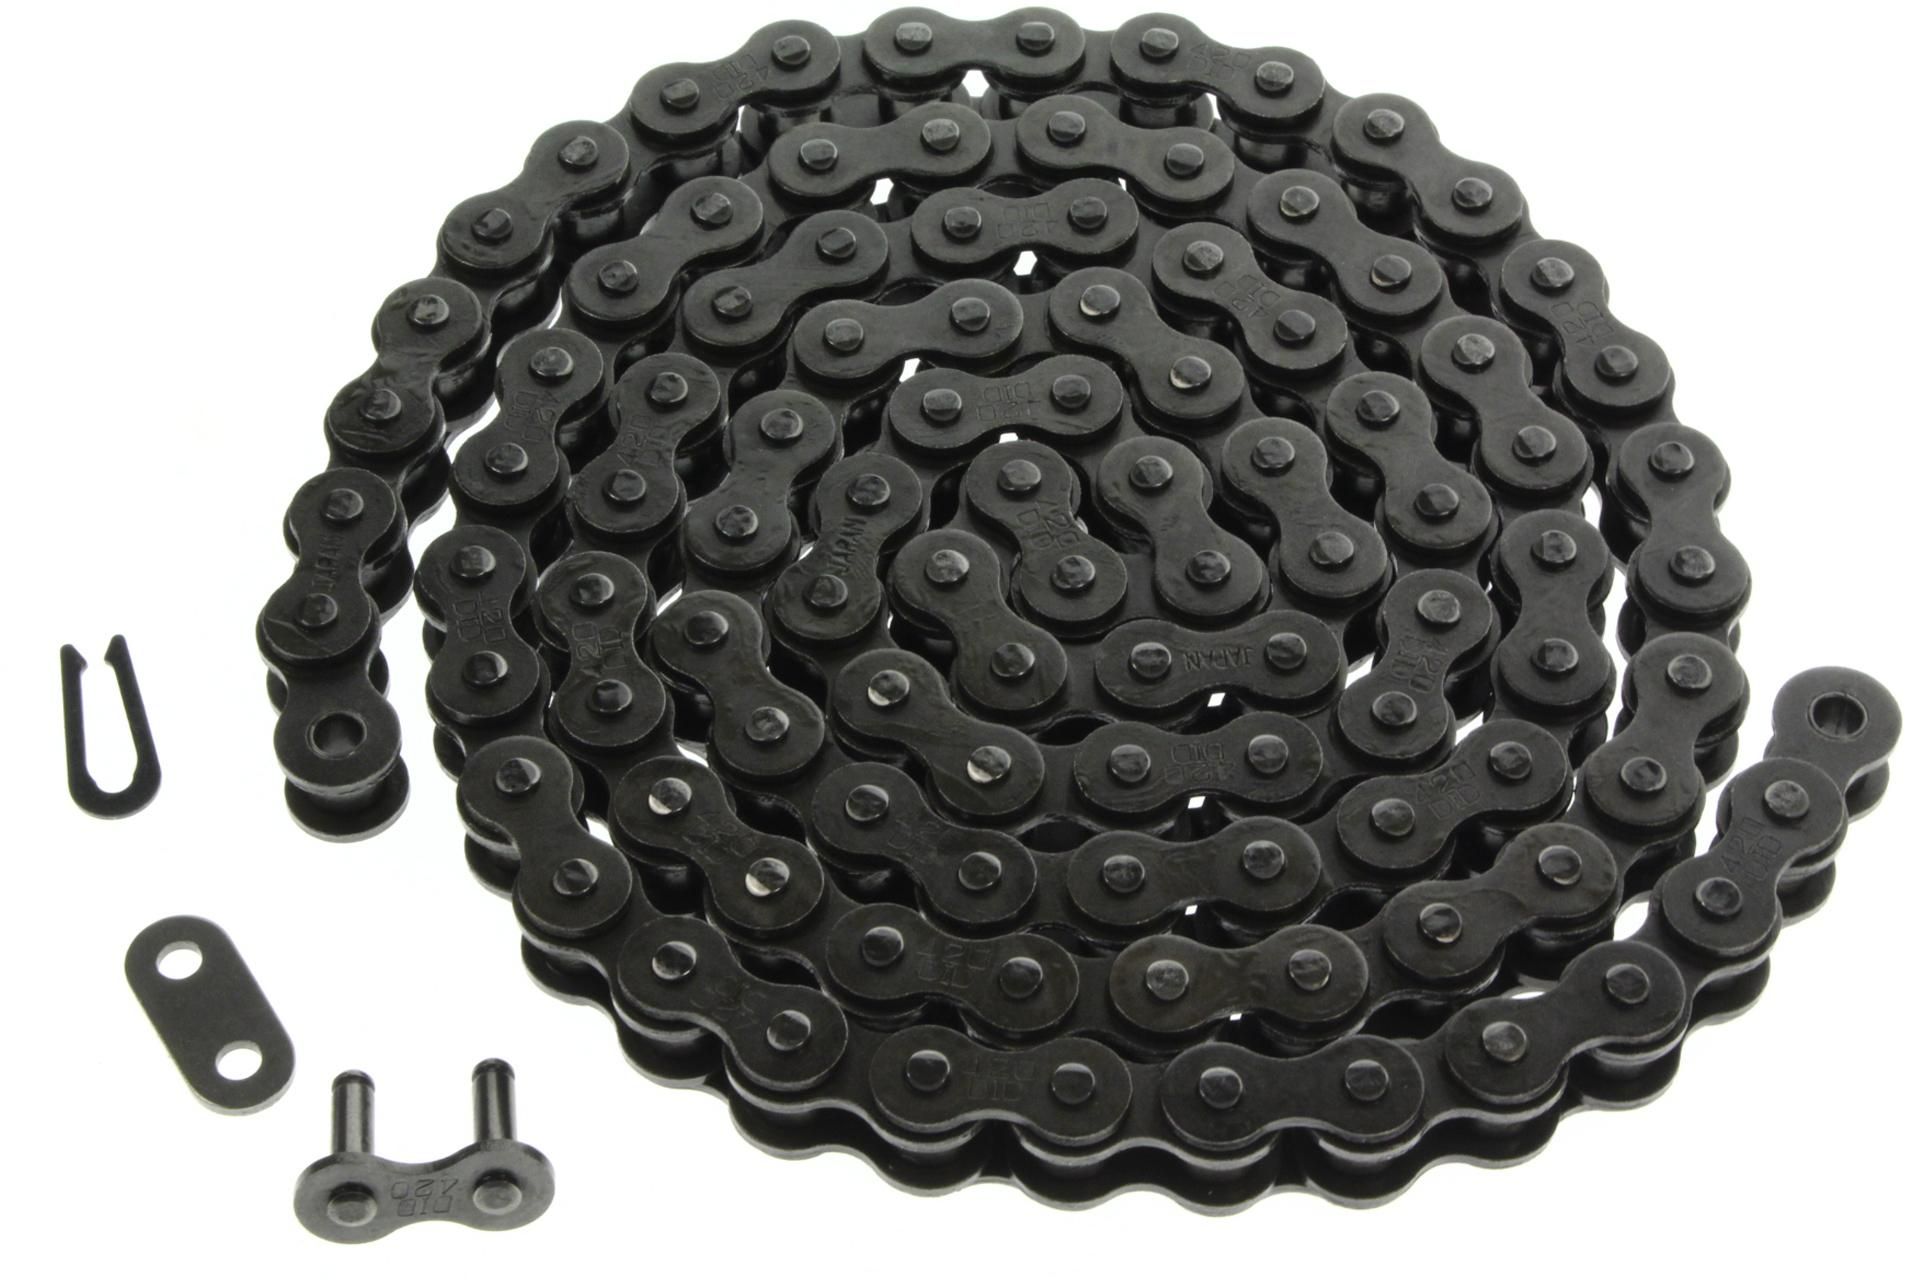 94500-03104-00 Superseded by 9Y580-52103-00 - CHAIN, DRIVE